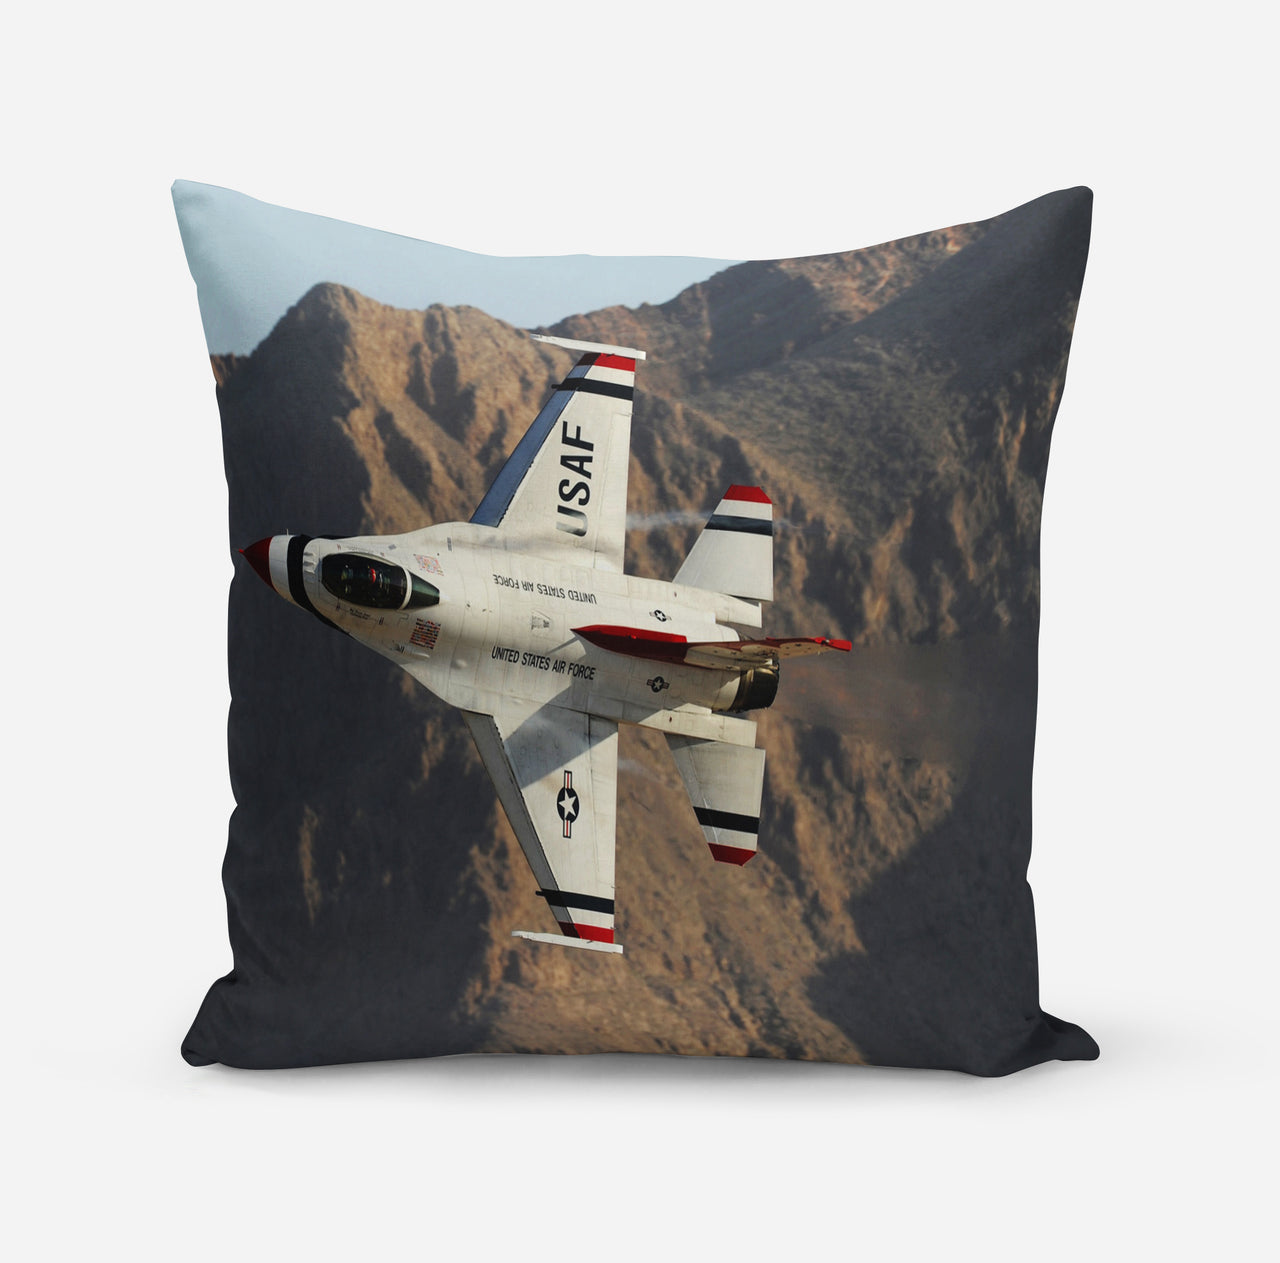 Amazing Show by Fighting Falcon F16 Designed Pillows